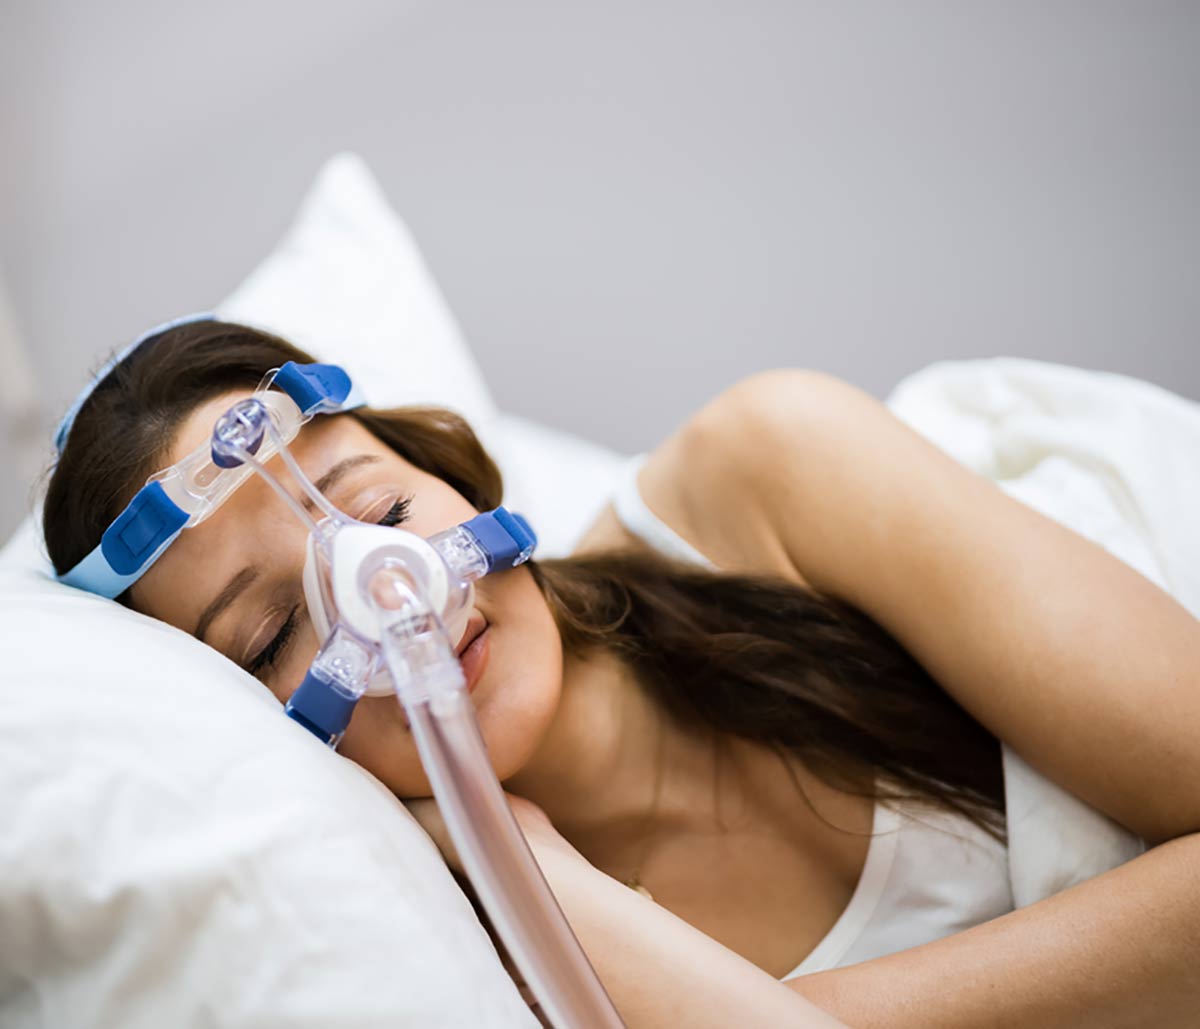 treating sleep apnea with oral appliance therapy, at Dr. Clint Bruyere DDS in Longview TX